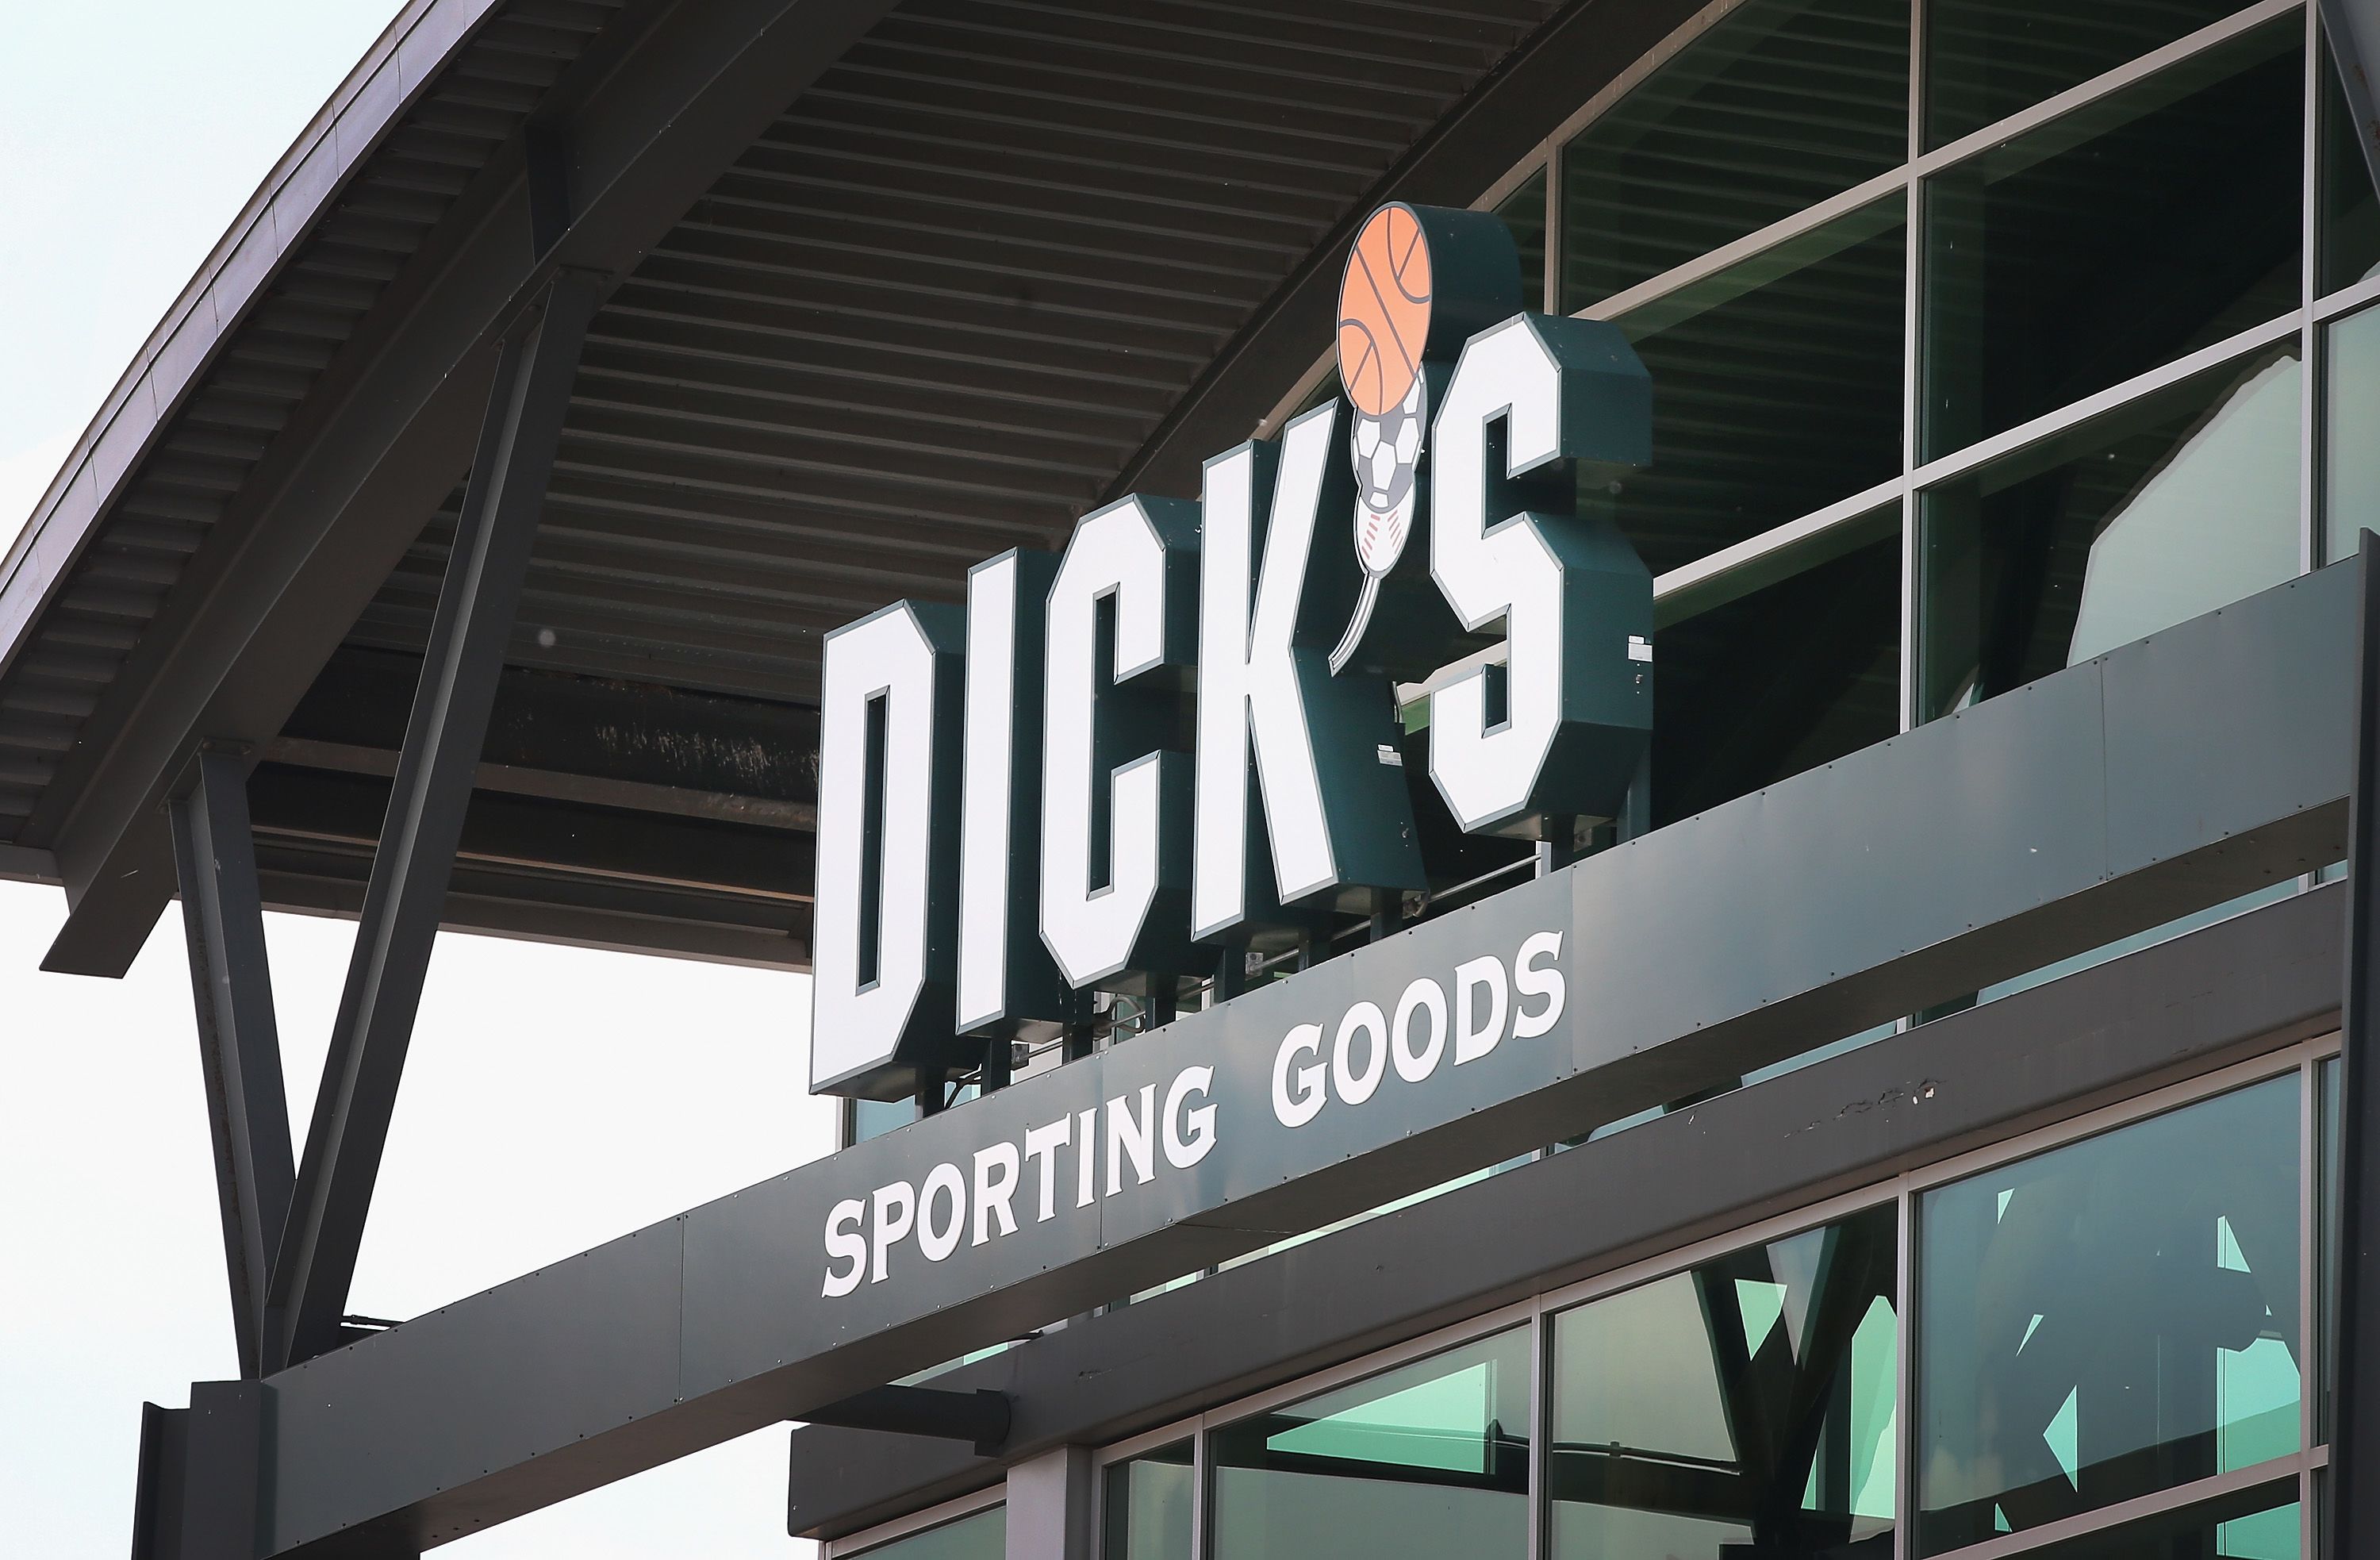 Dick's Sporting Goods reports first quarter 2019 earnings beat